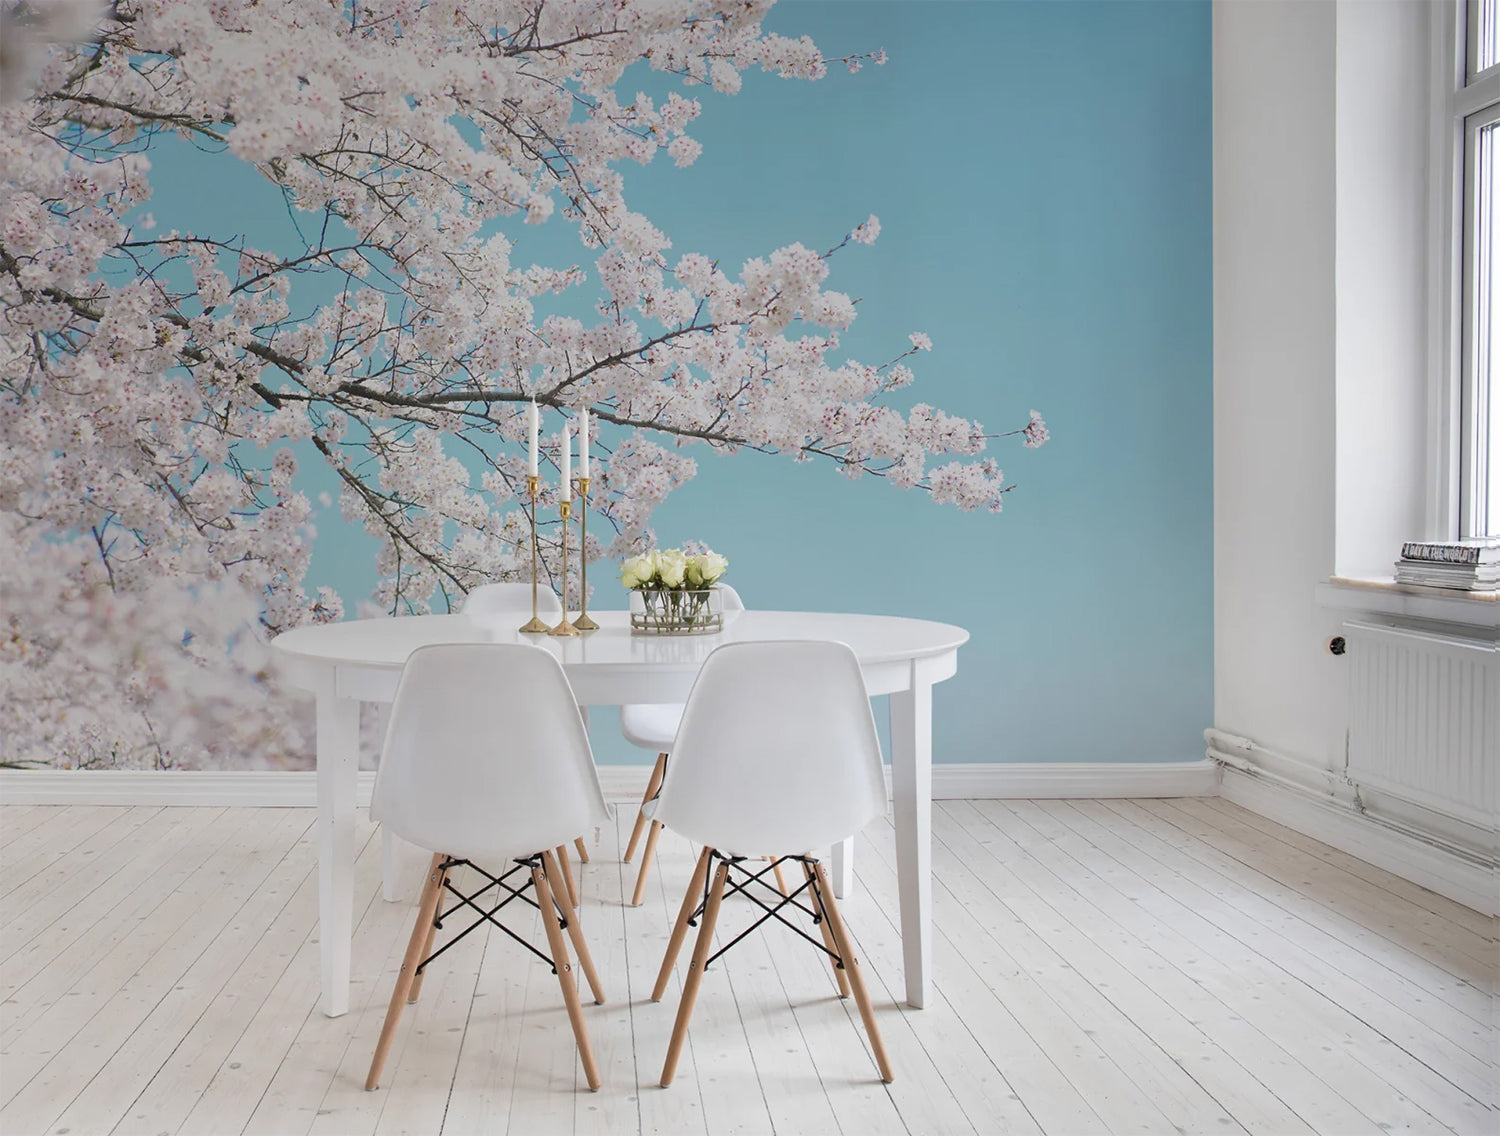 Japanese Cherry Tree, Mural Wallpaper in a cosy dining area with white furnished dining set.